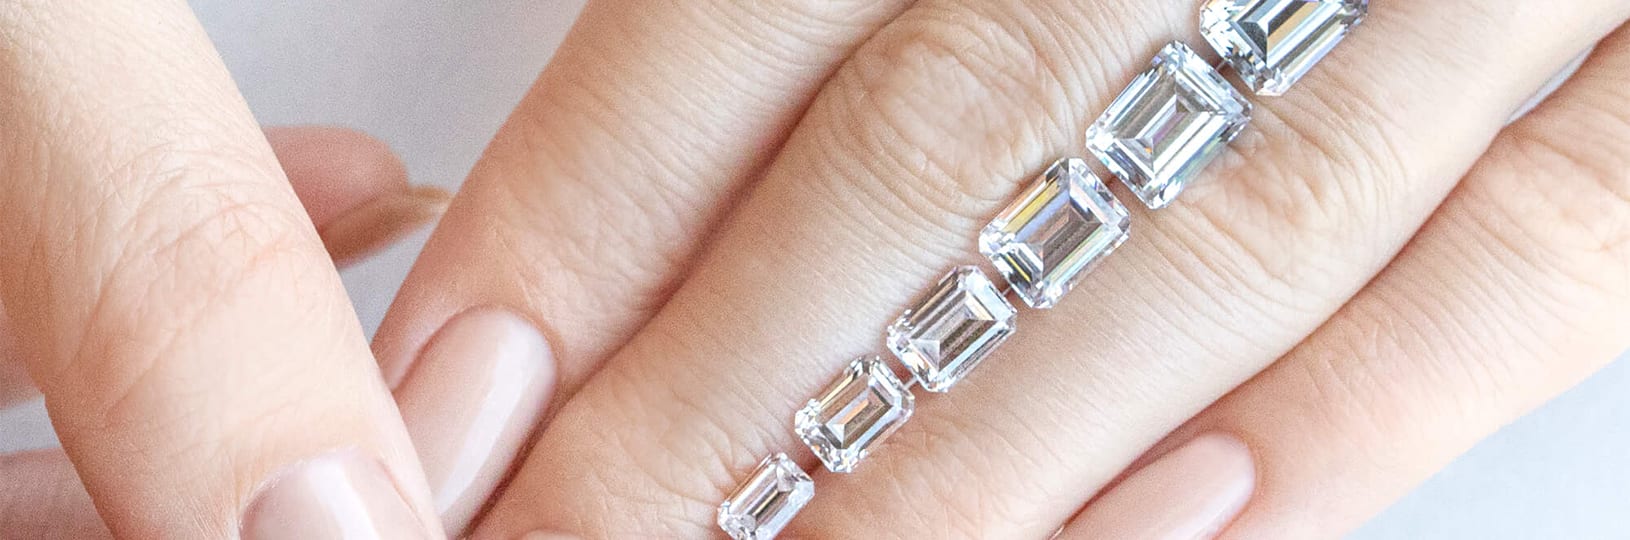 Emerald cut stones compared by carat size